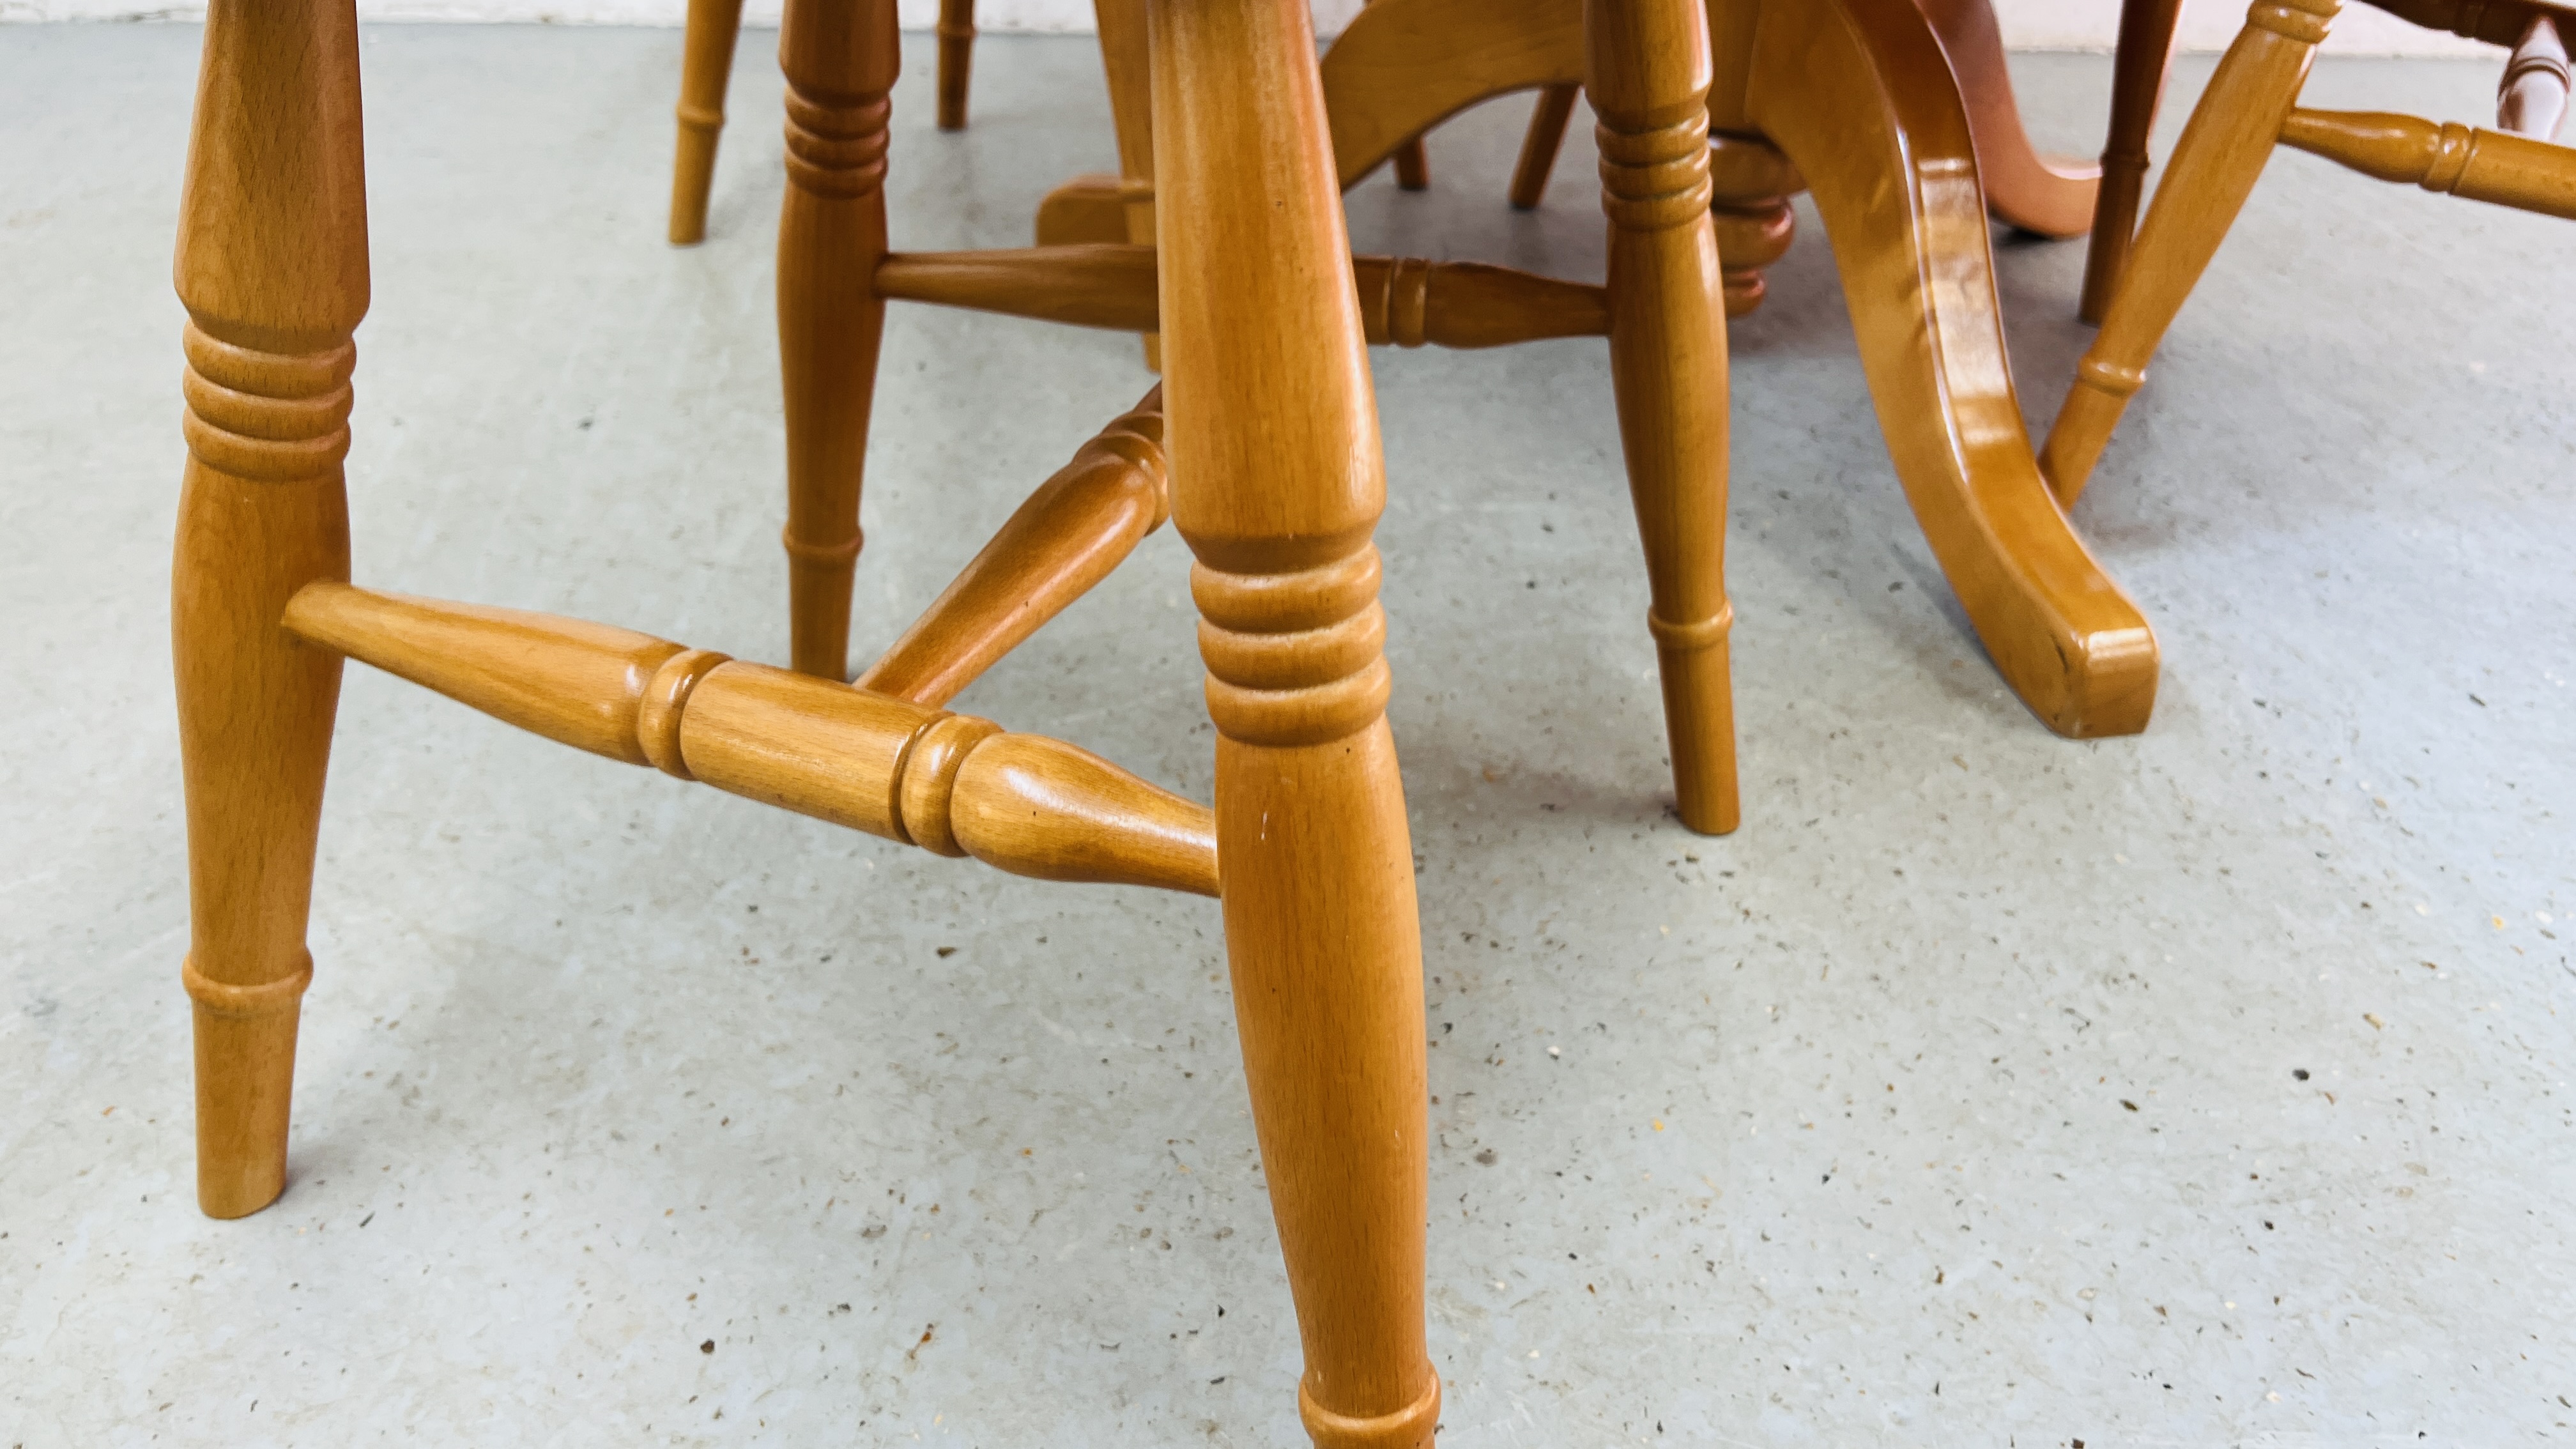 A SOLID MAPLE CIRCULAR TOPPED DINING TABLE ON PEDESTAL BASE ALONG WITH 4 BEACH CHAIRS IN CHERRY - Image 9 of 10